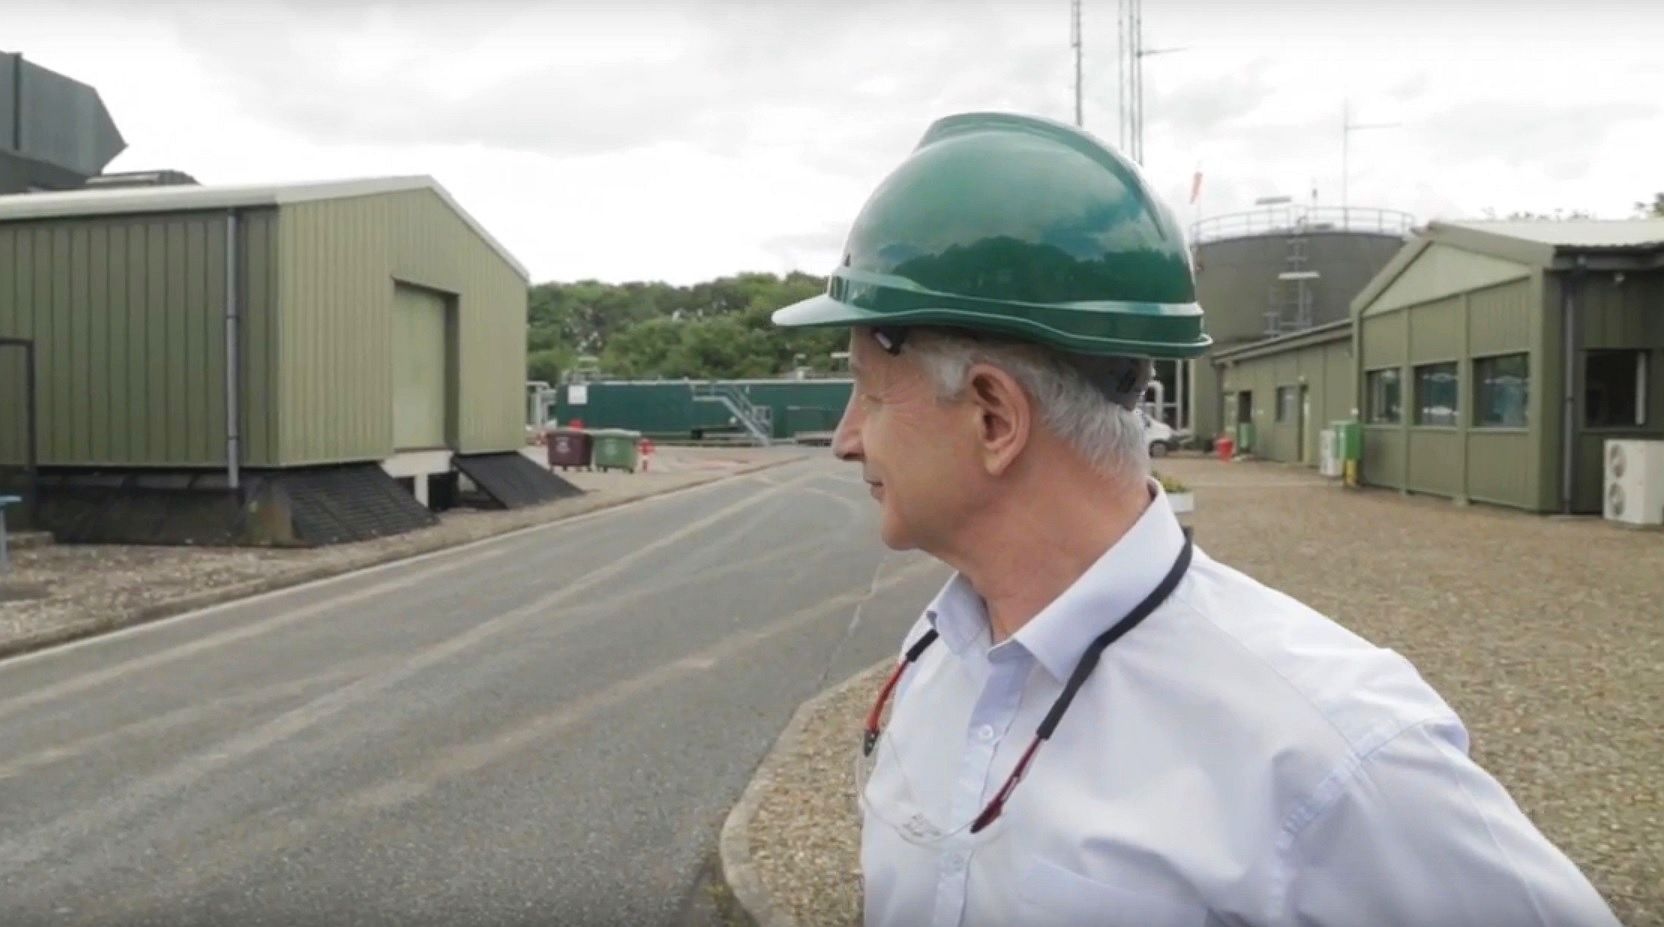 John Dewar, operation director at Third Energy, aims to soothe farmers fears of fracking